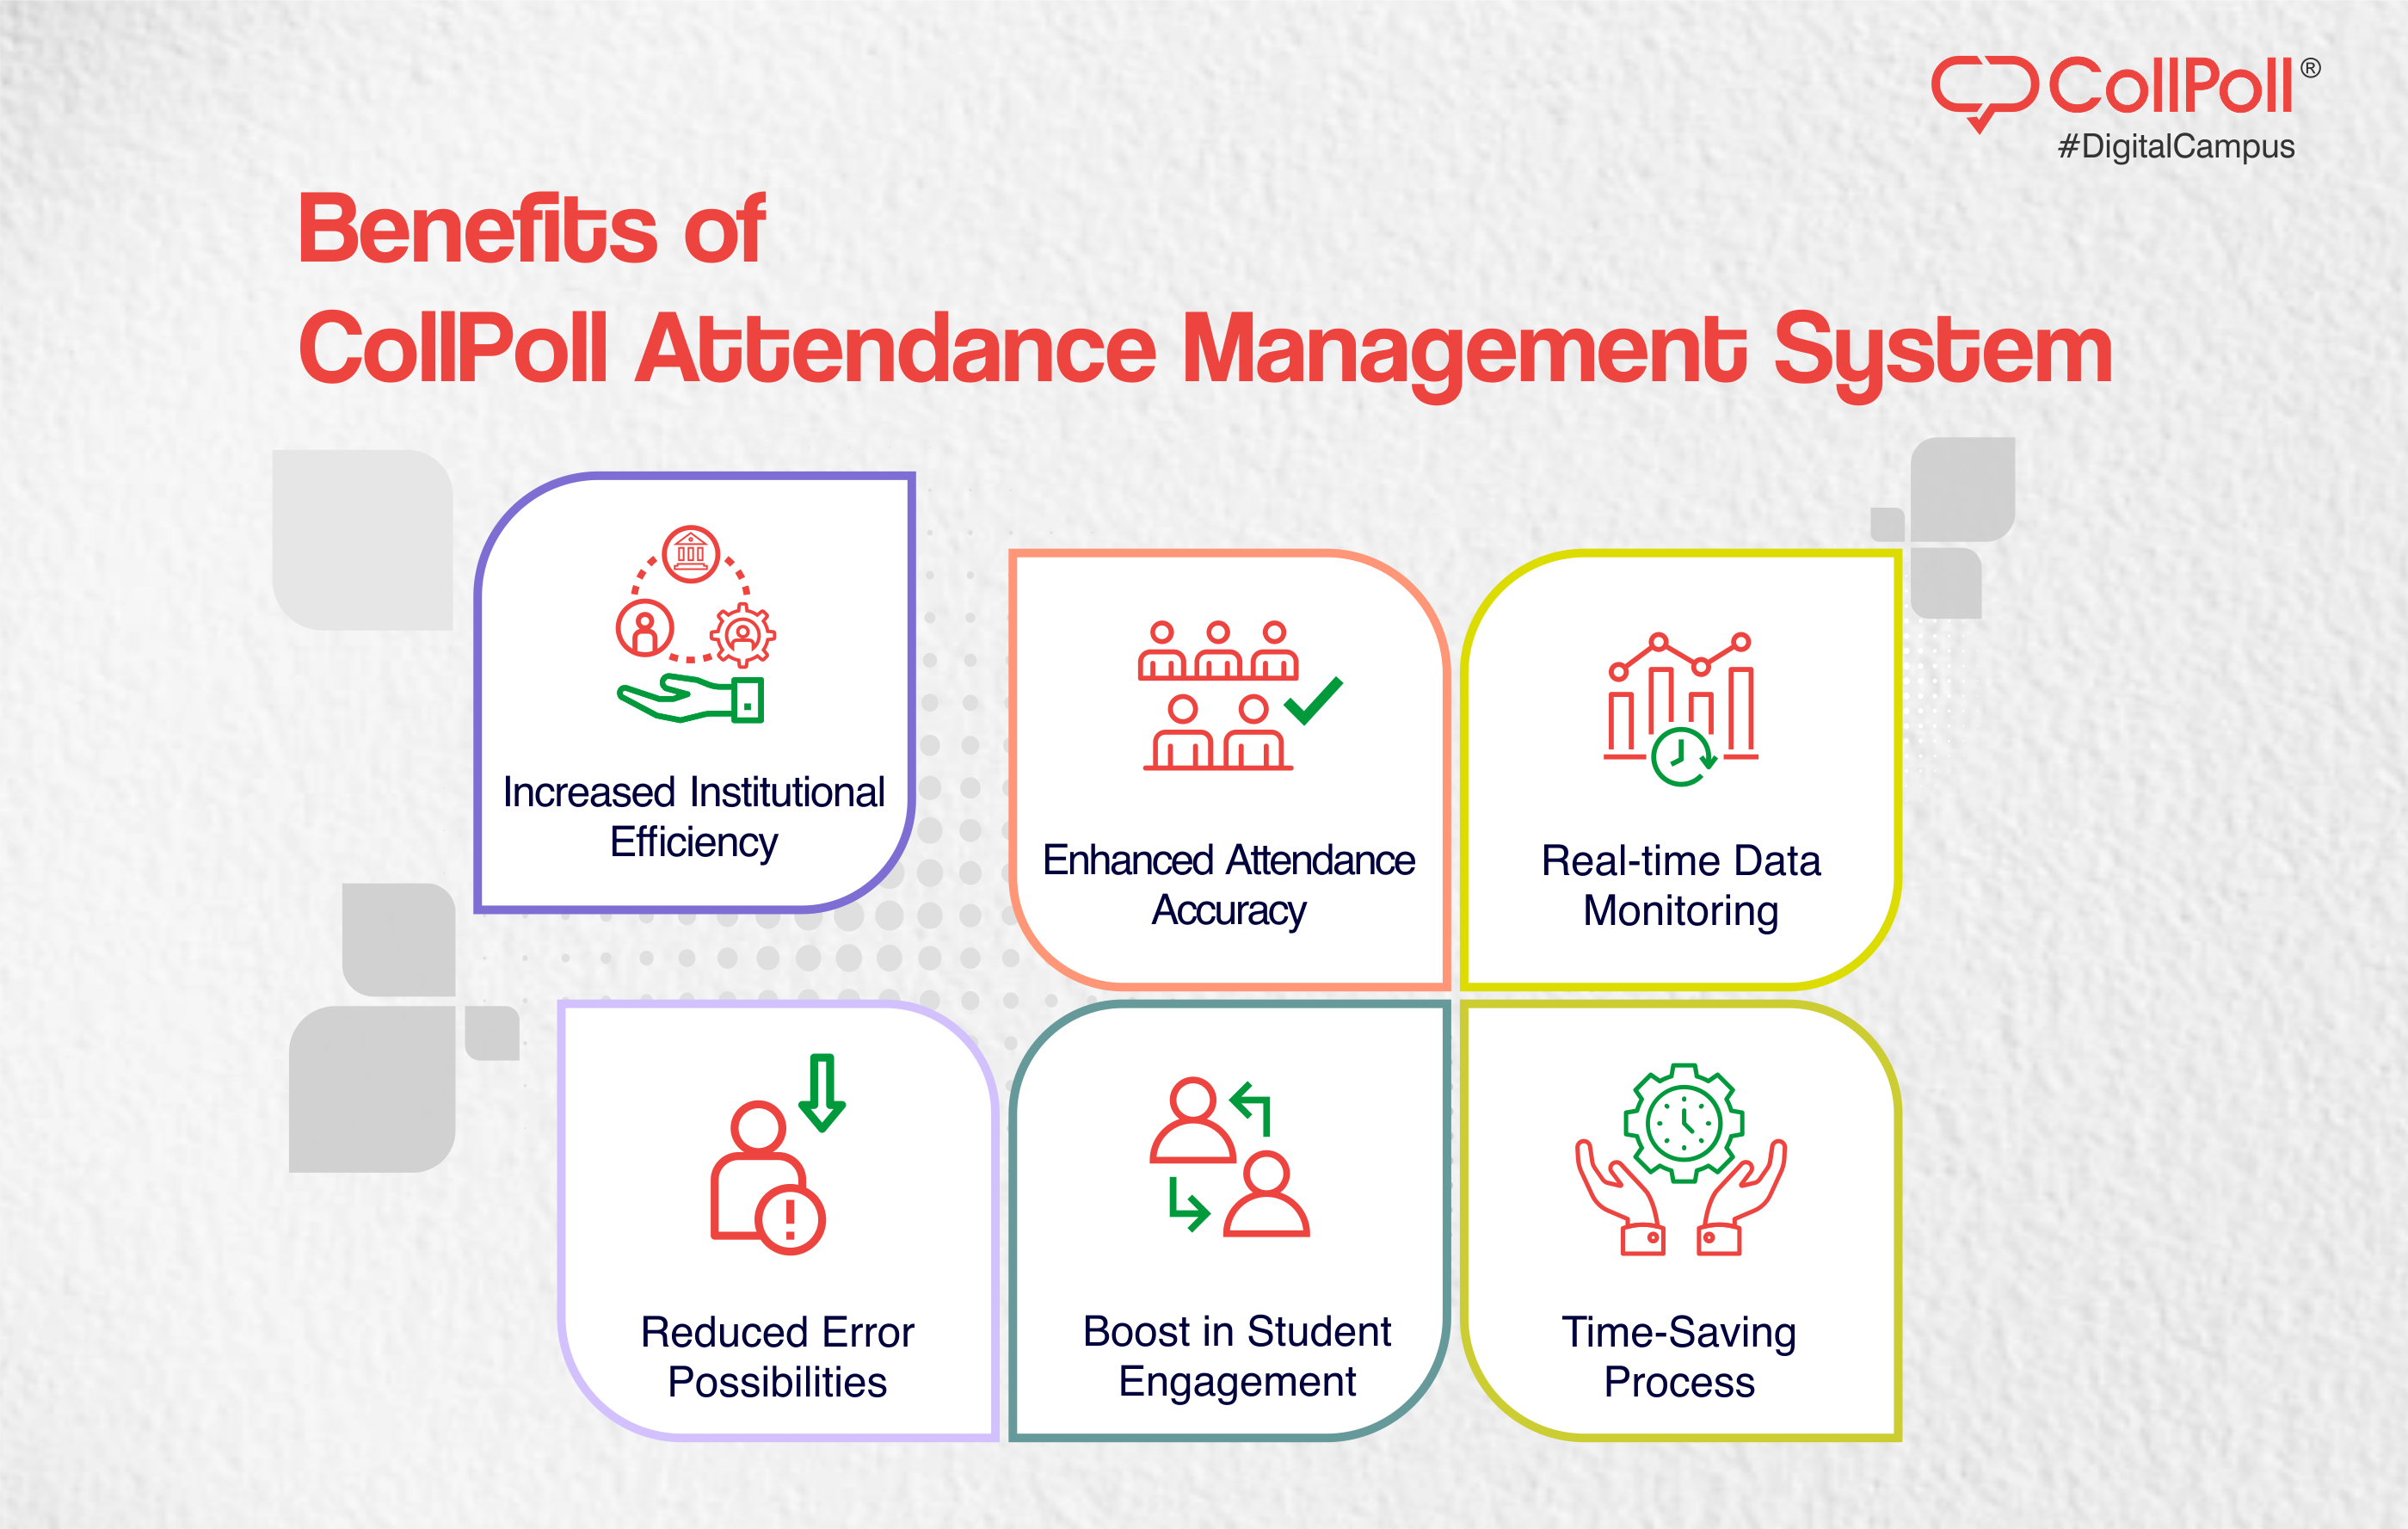 Benefits of CollPoll's Attendance Management System